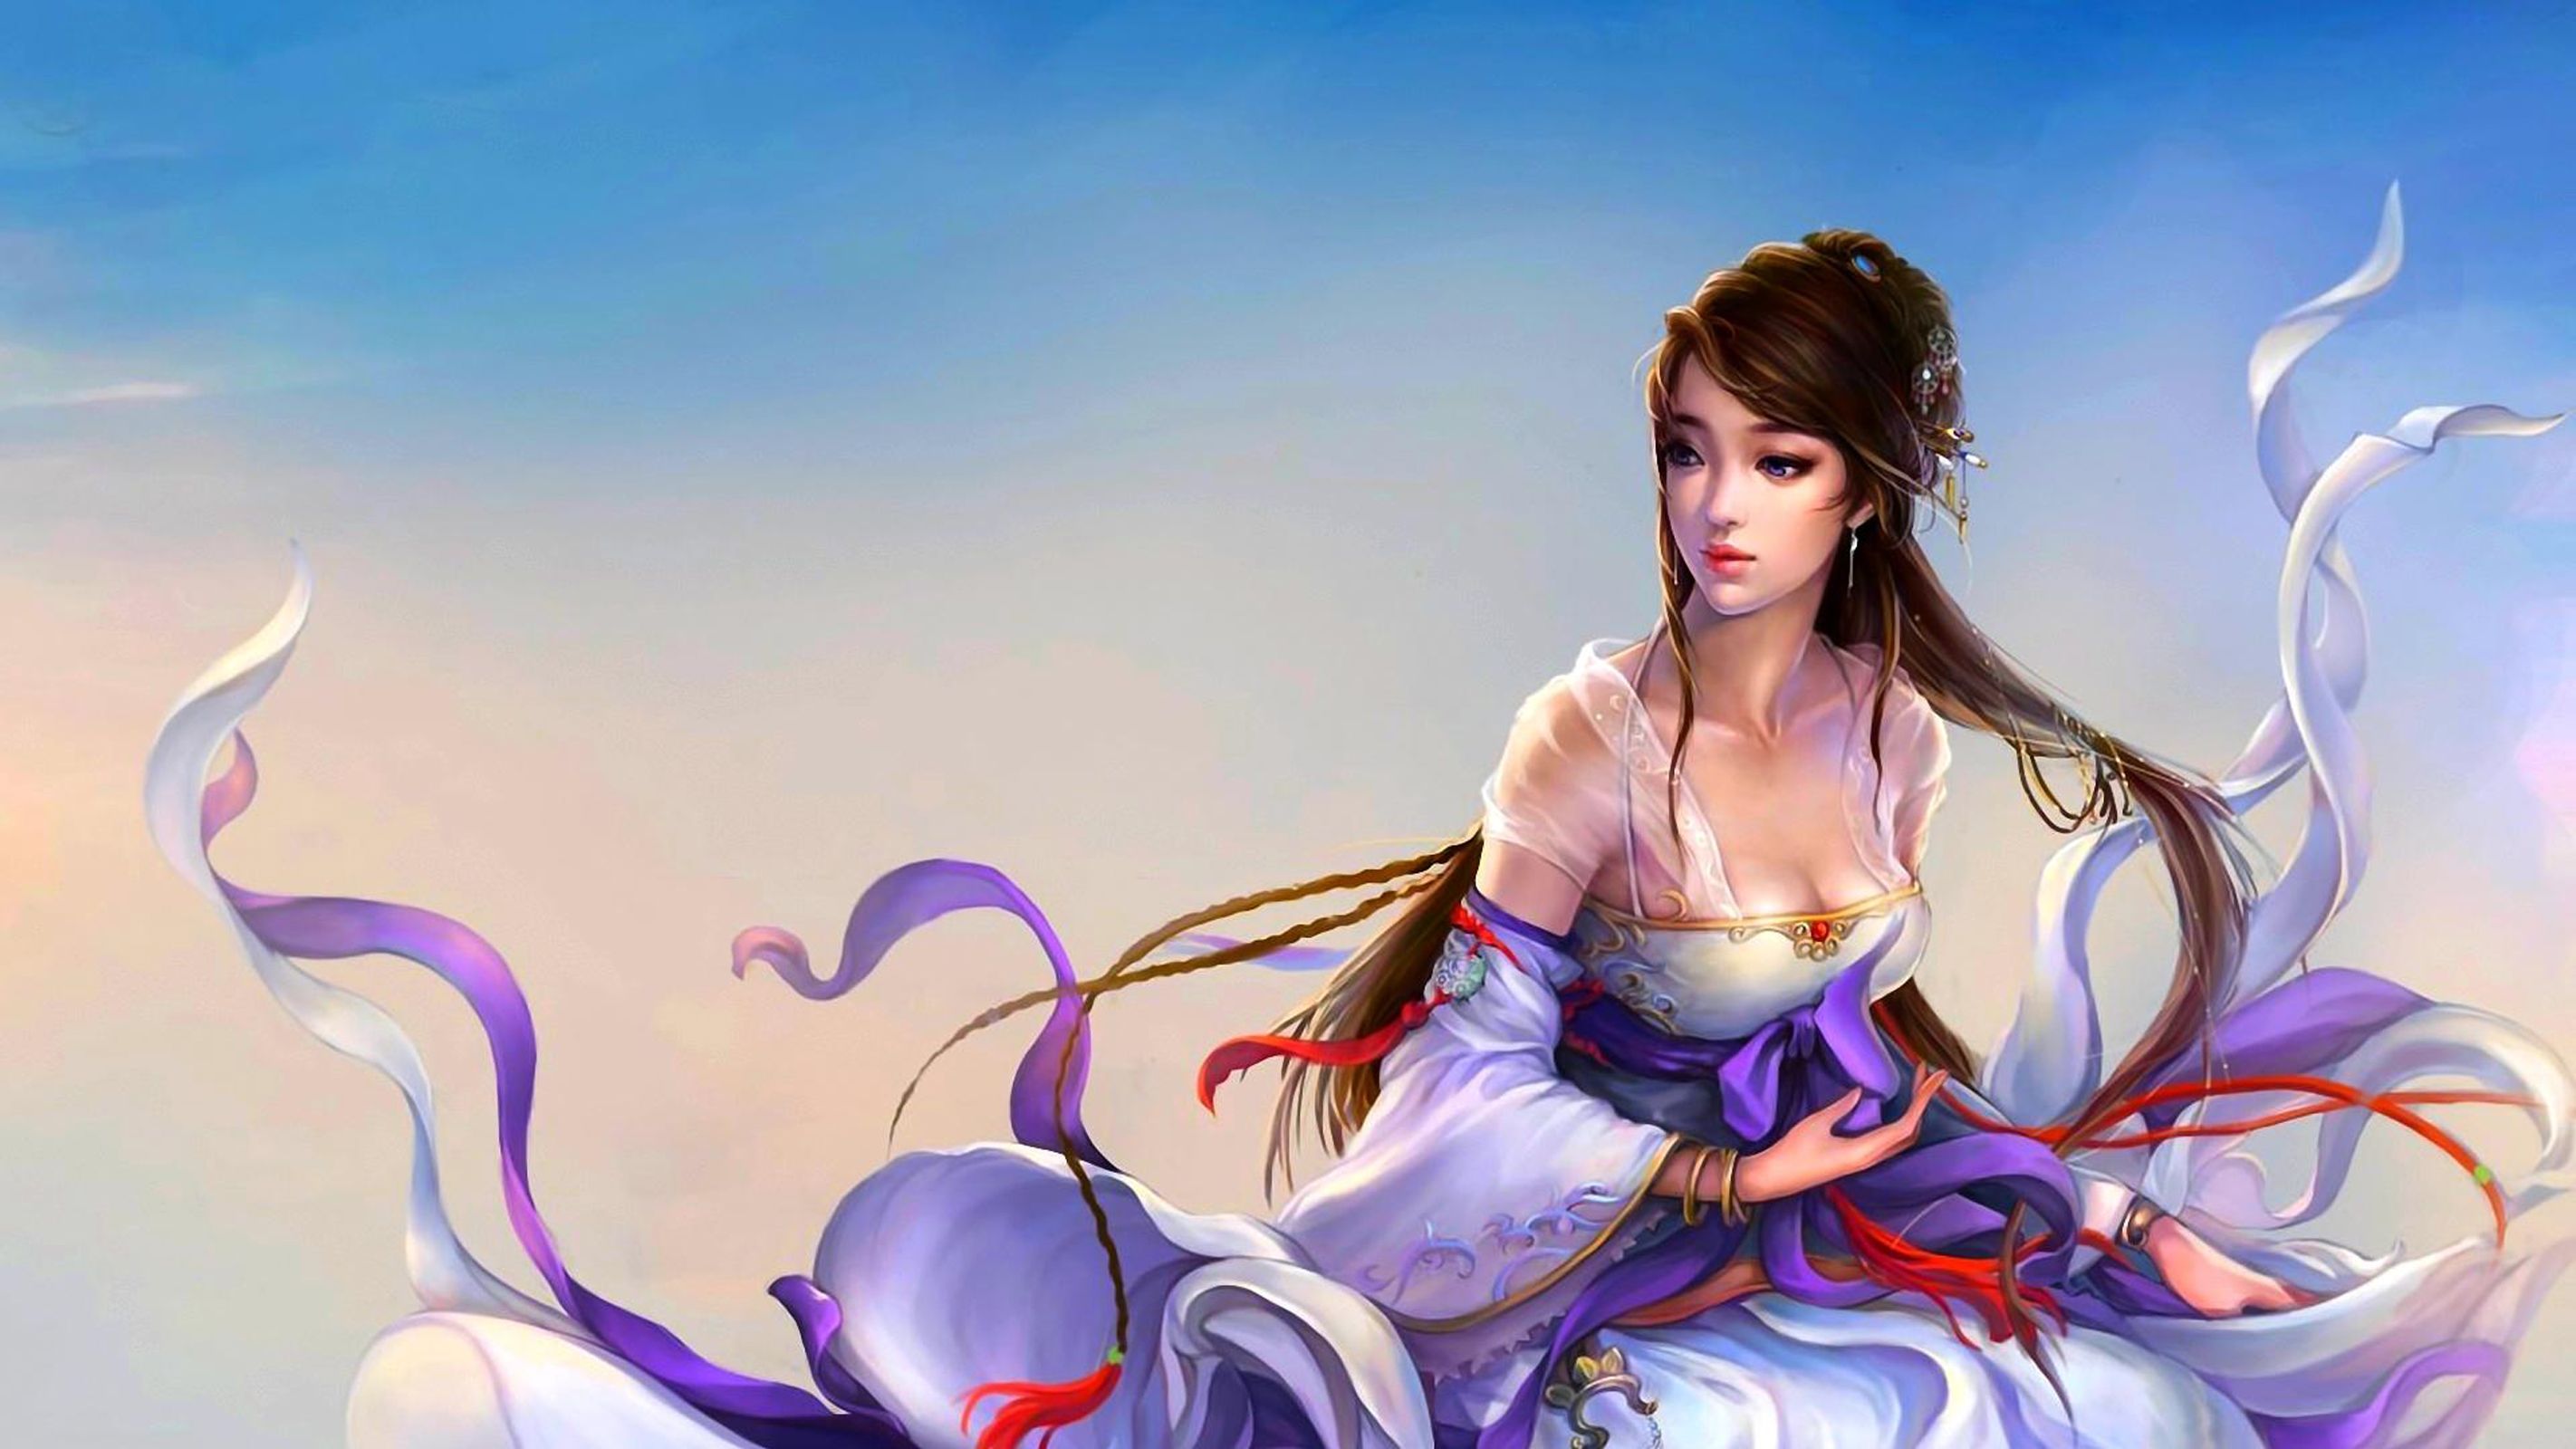 Princess China Girl 3D And Cg & Abstract Background Wallpaper On